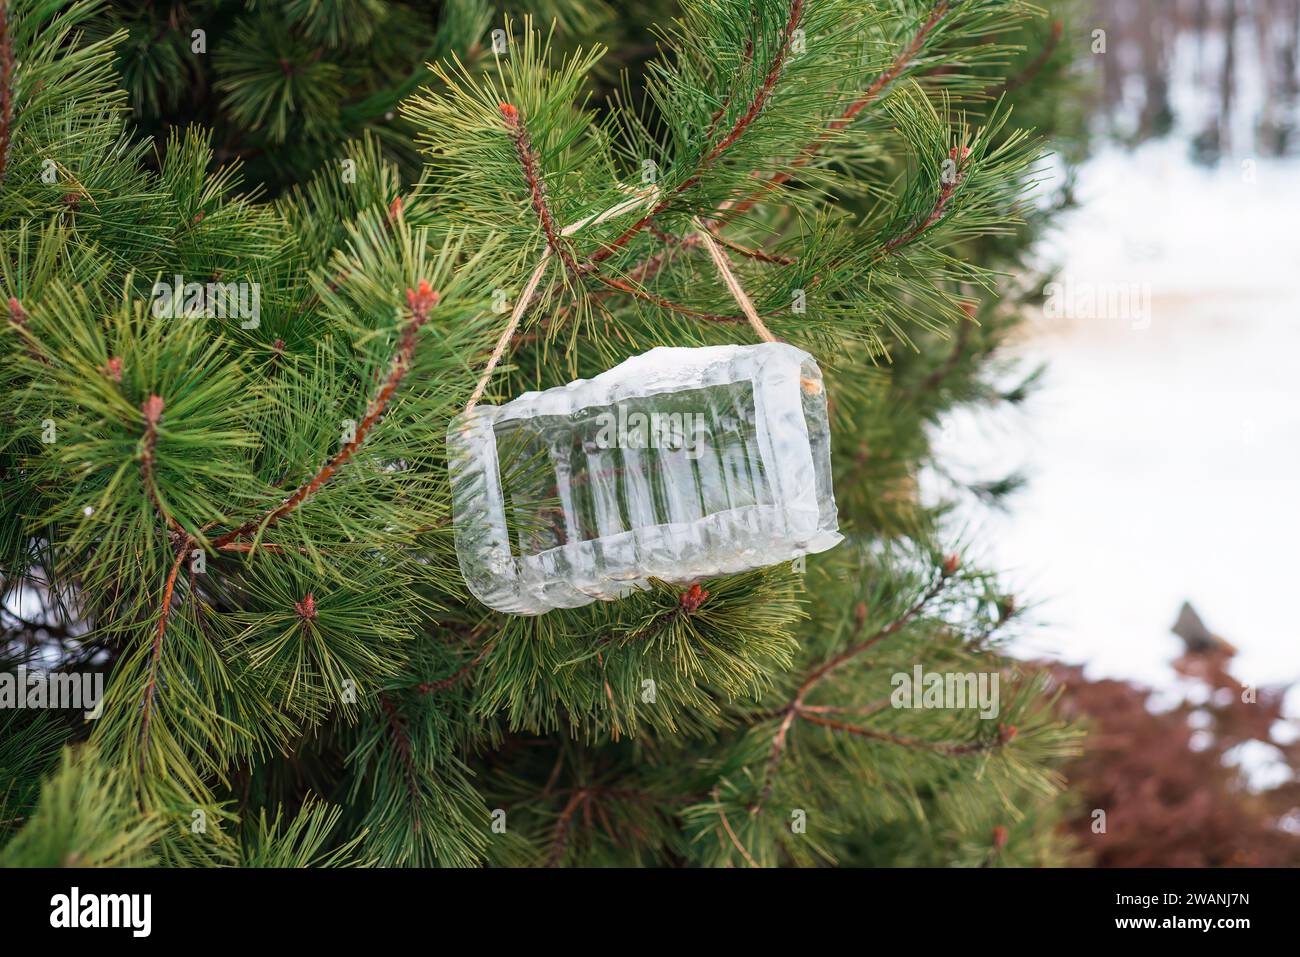 plastic bird feeder hanging on a Christmas tree in winter Stock Photo